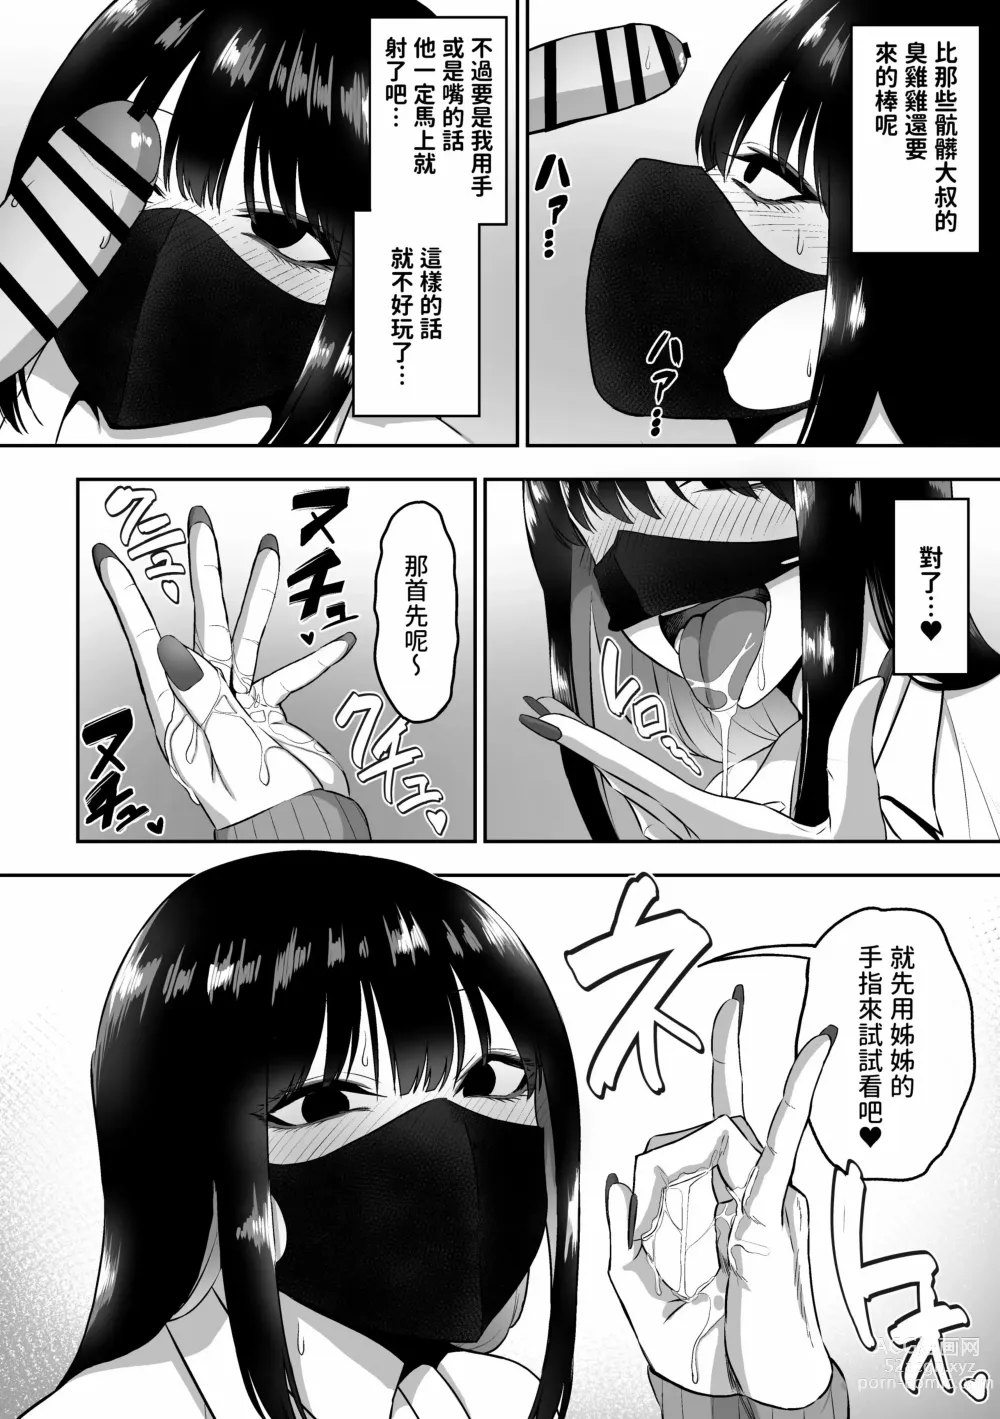 Page 7 of doujinshi 三食纳豆辣妹